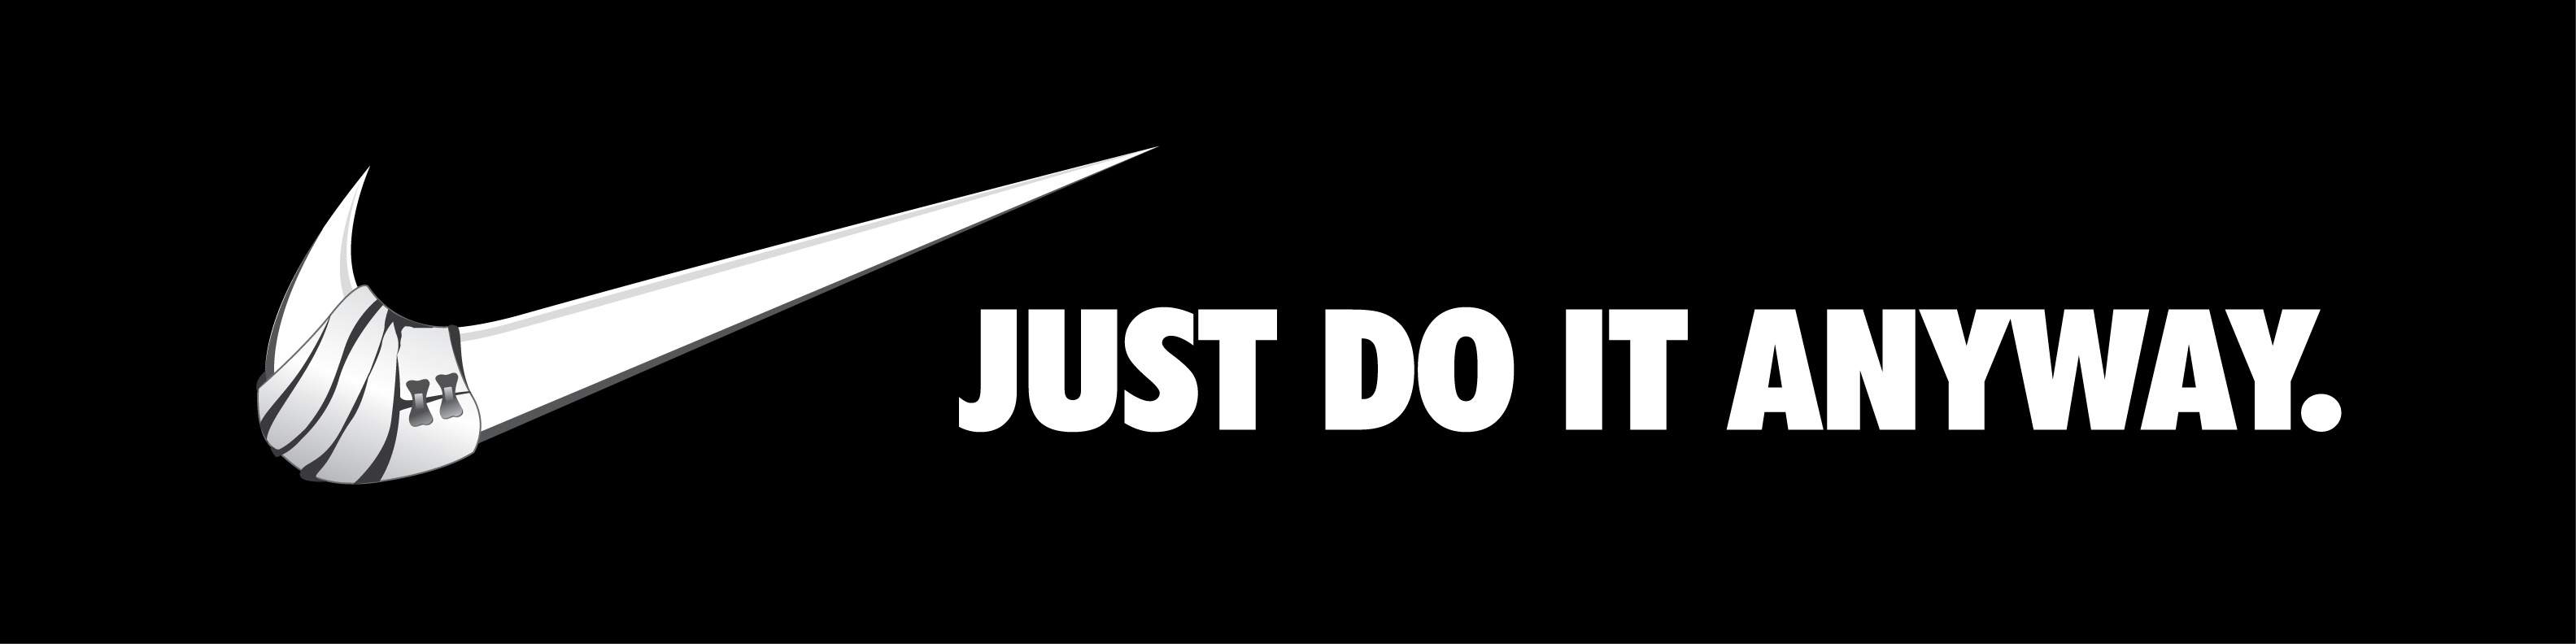 High Resolution Wallpaper on Nike Wallpaper 1366x768 Just Do In Wallpapers   Real Madrid Wallpapers